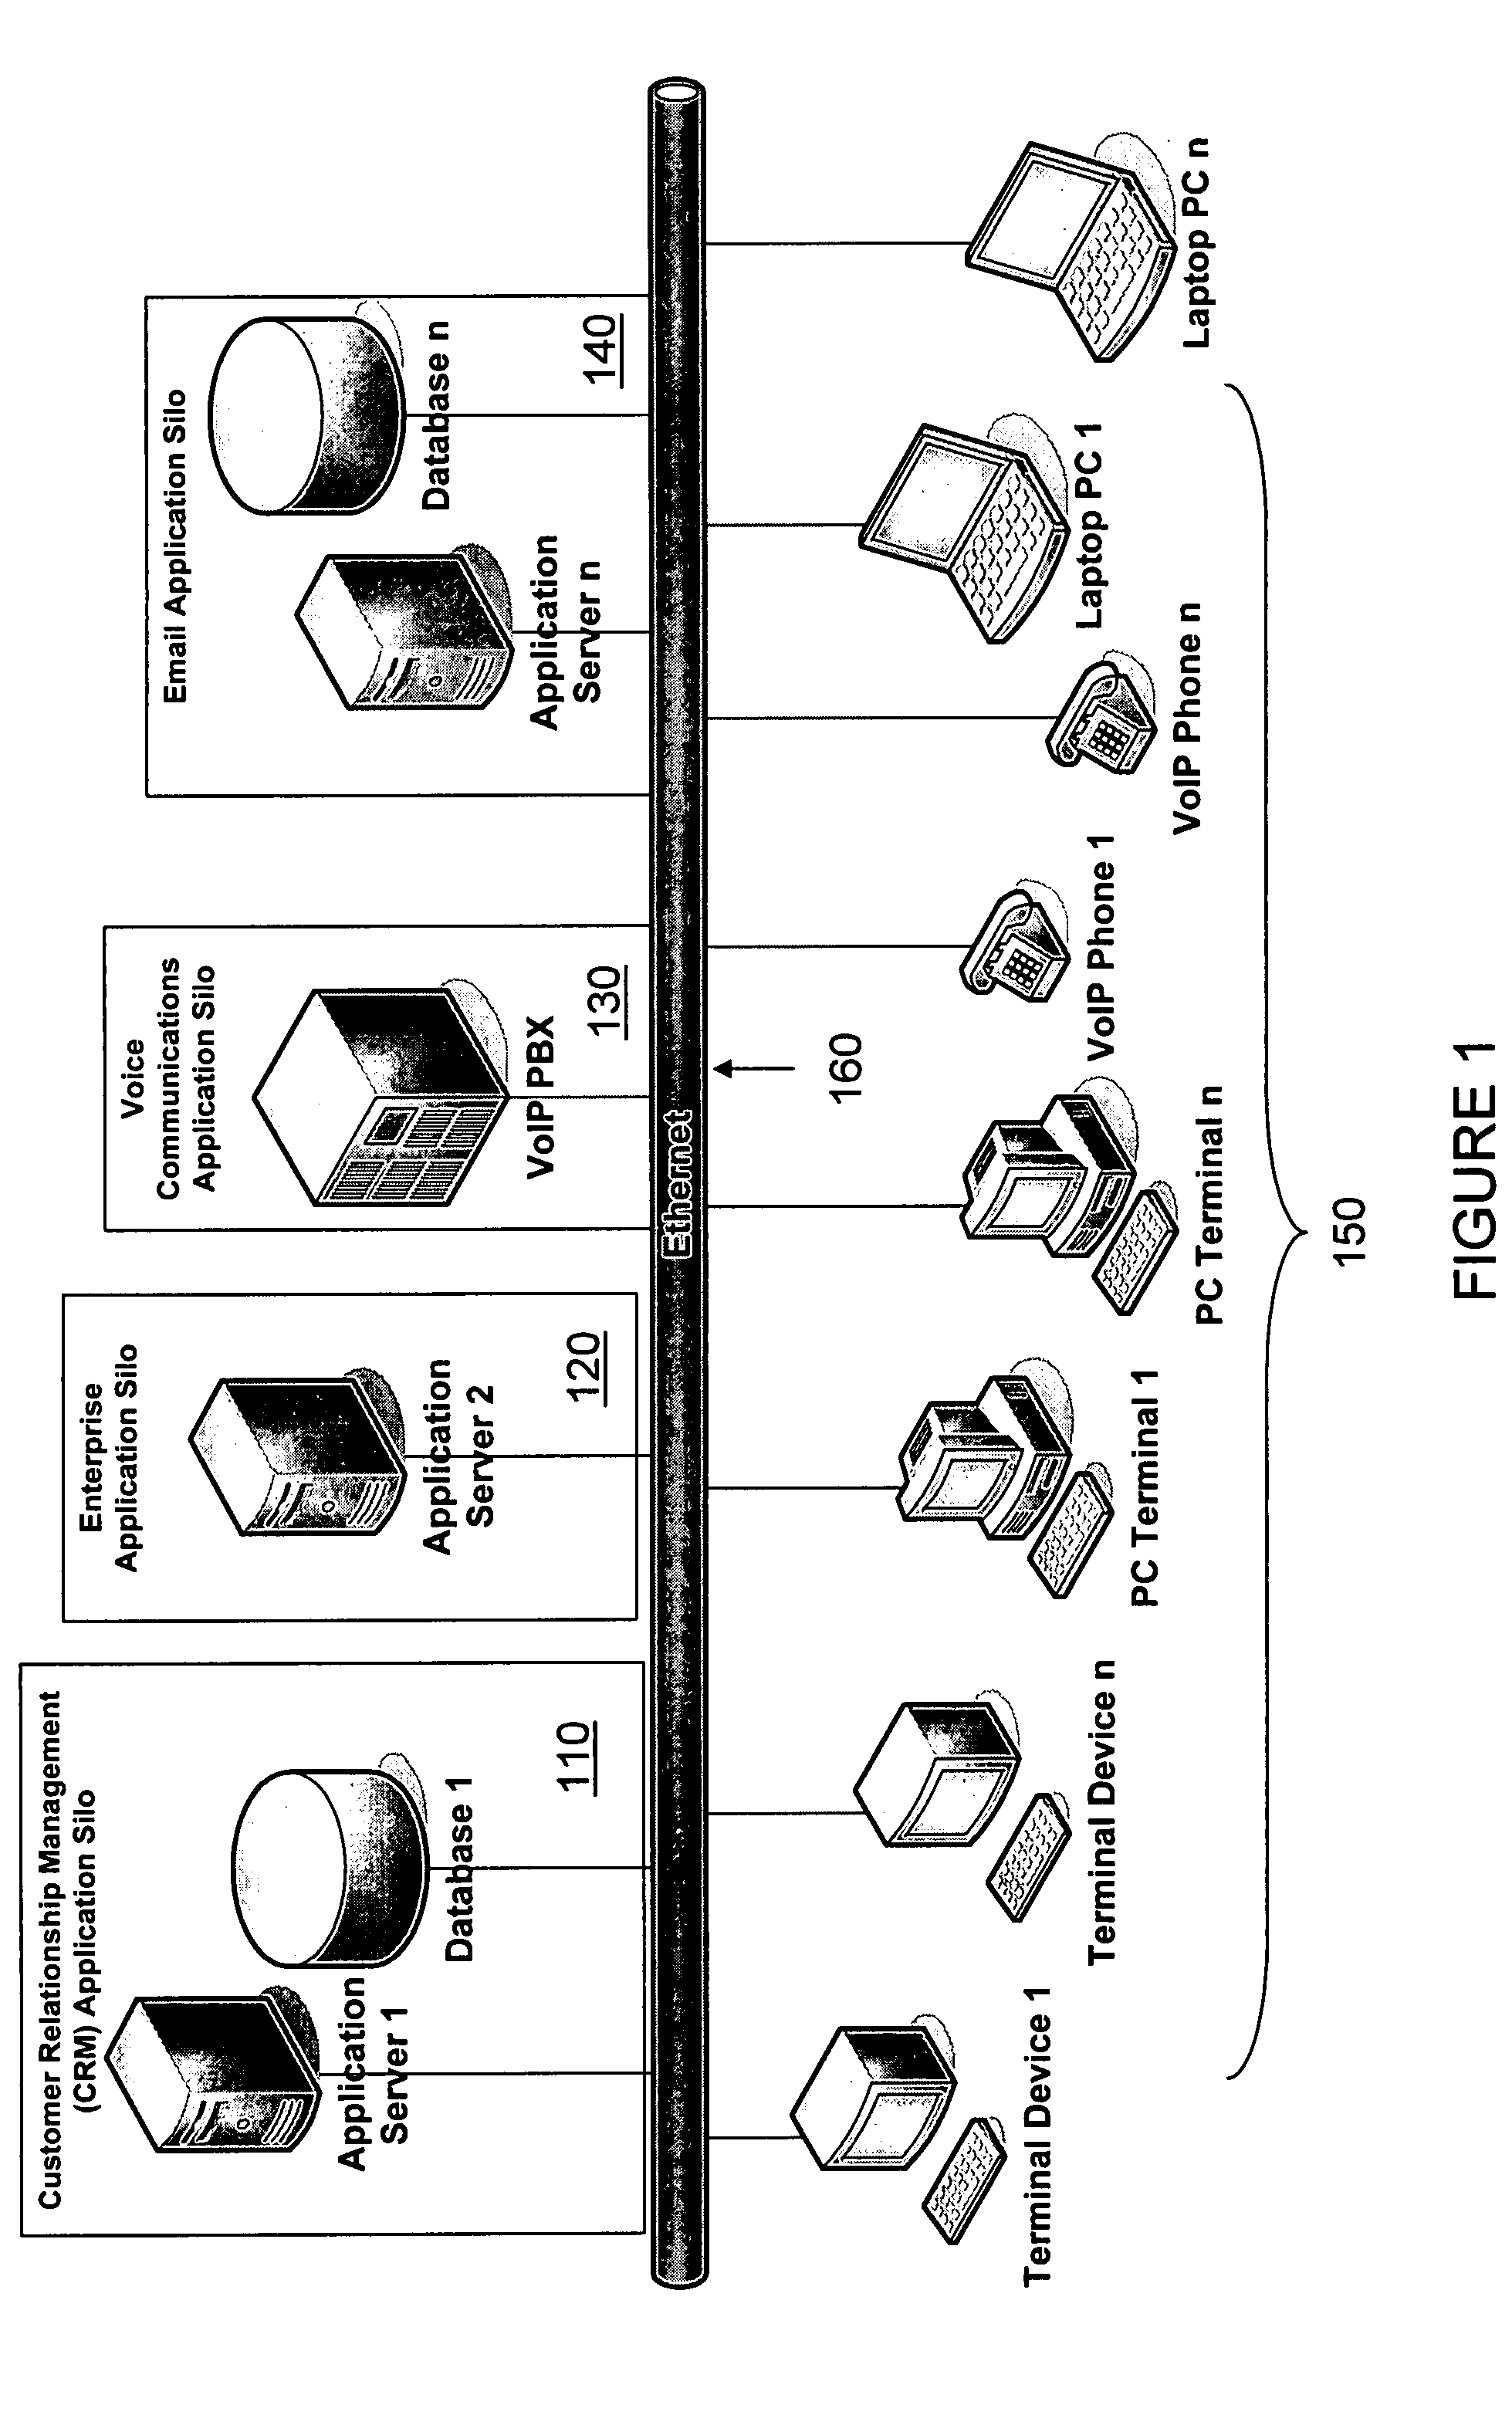 Communication system employing a control layer architecture